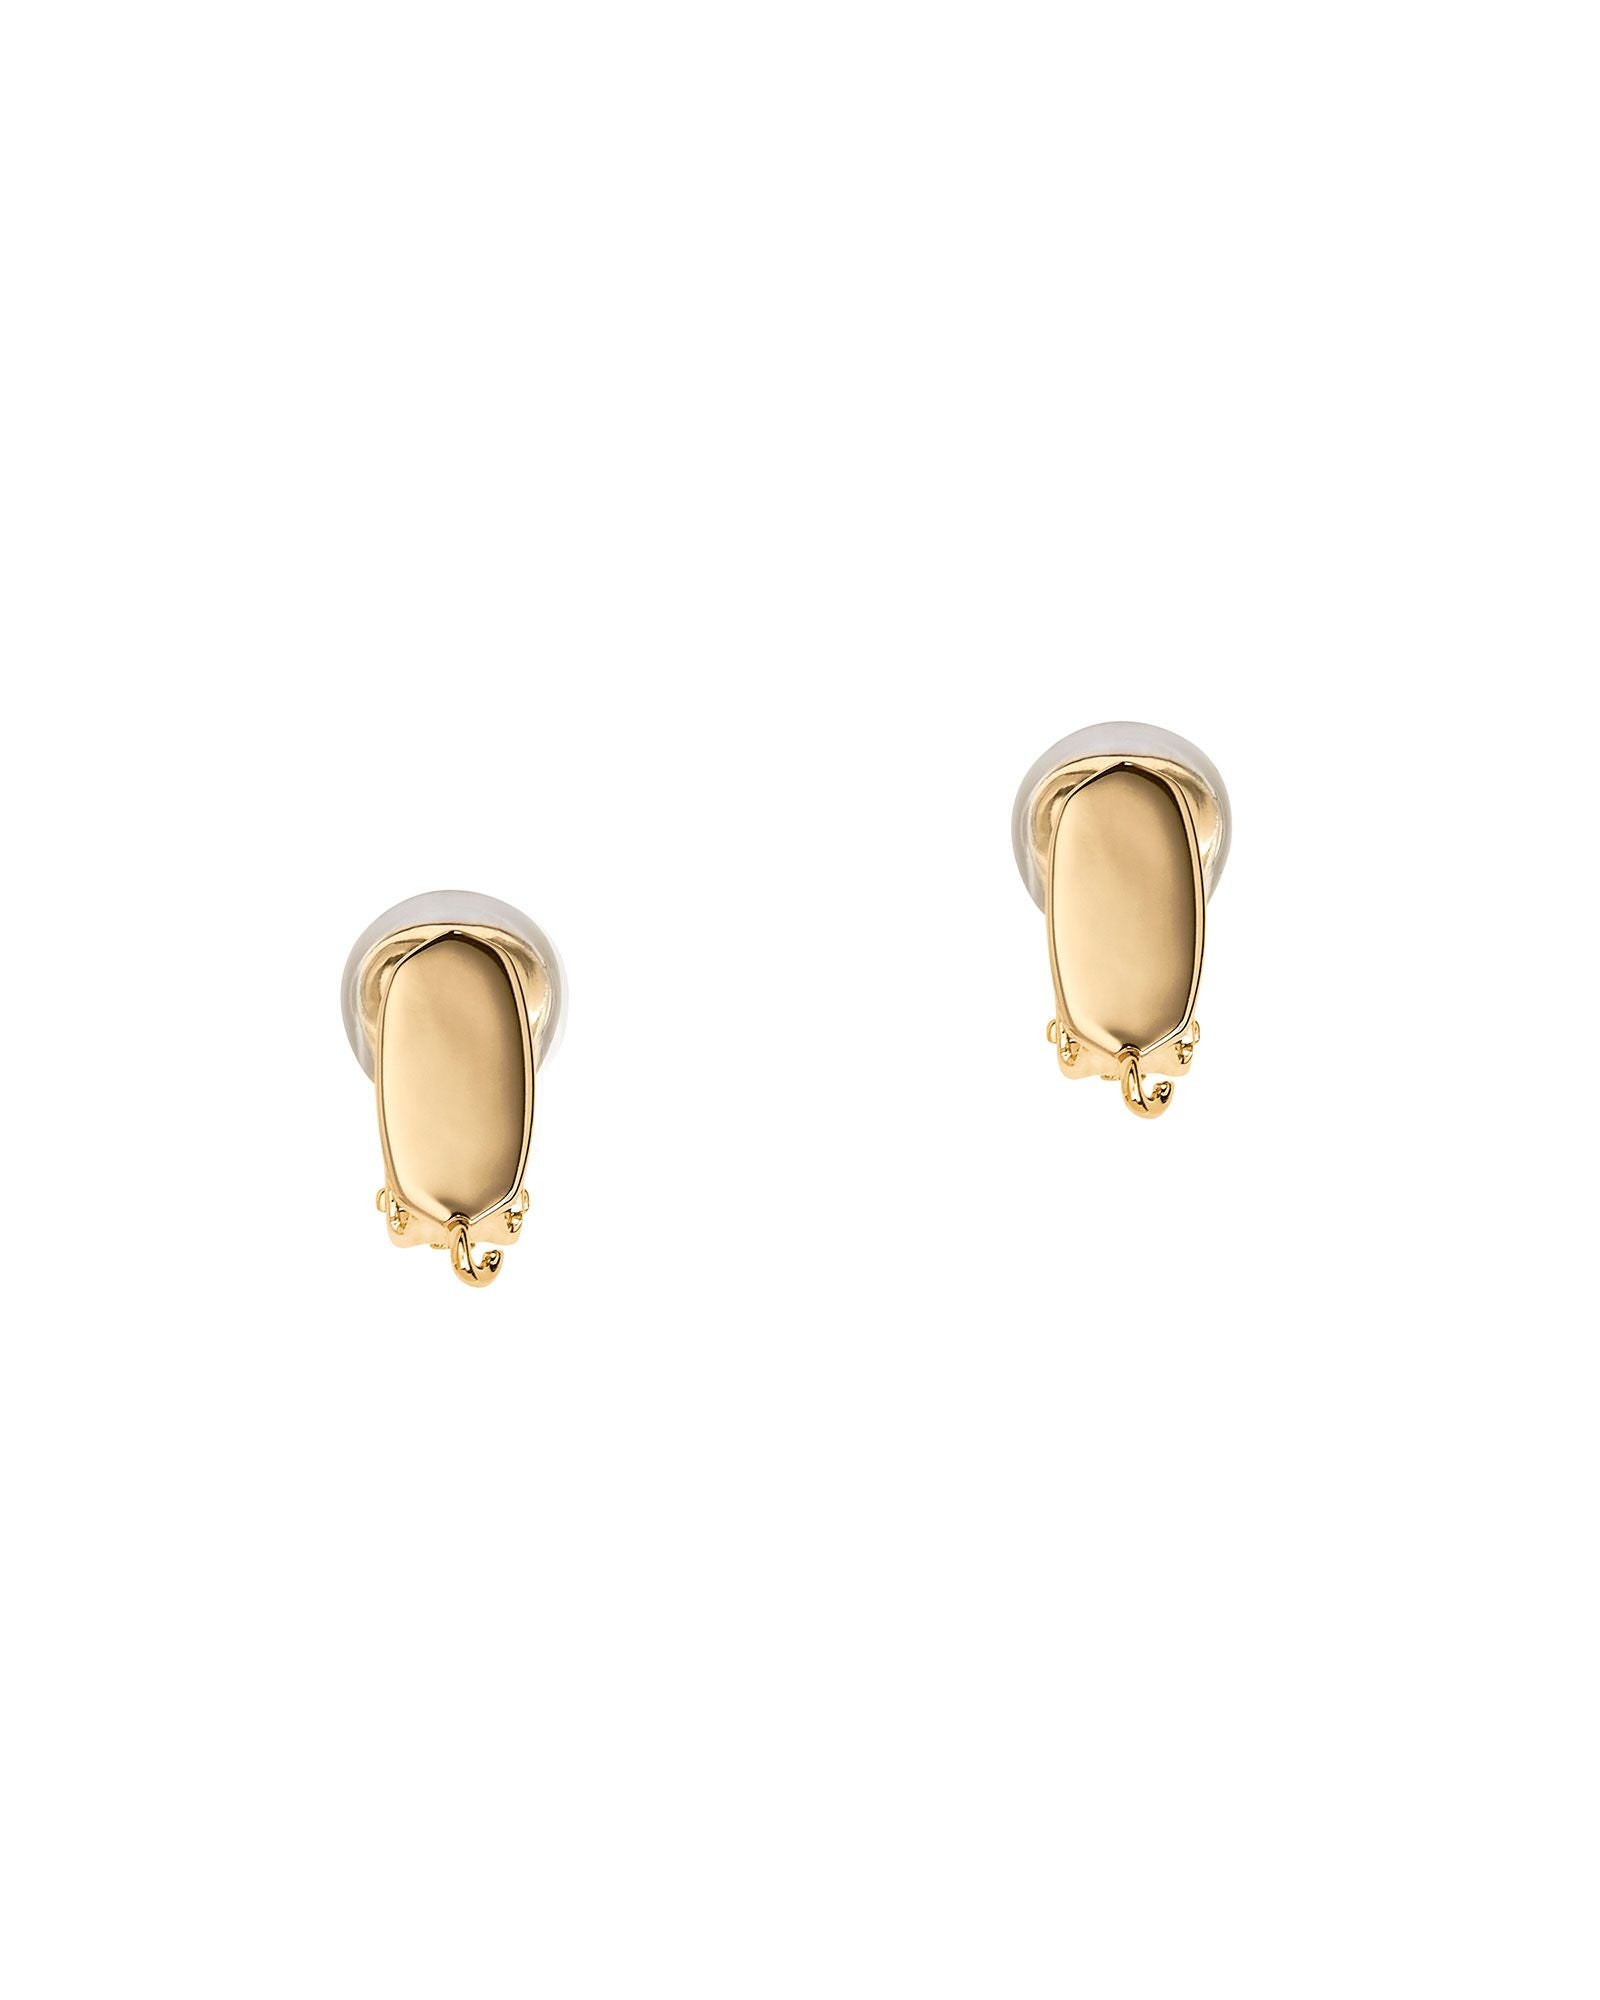 Clip On Converter for Earrings Gold or Silver